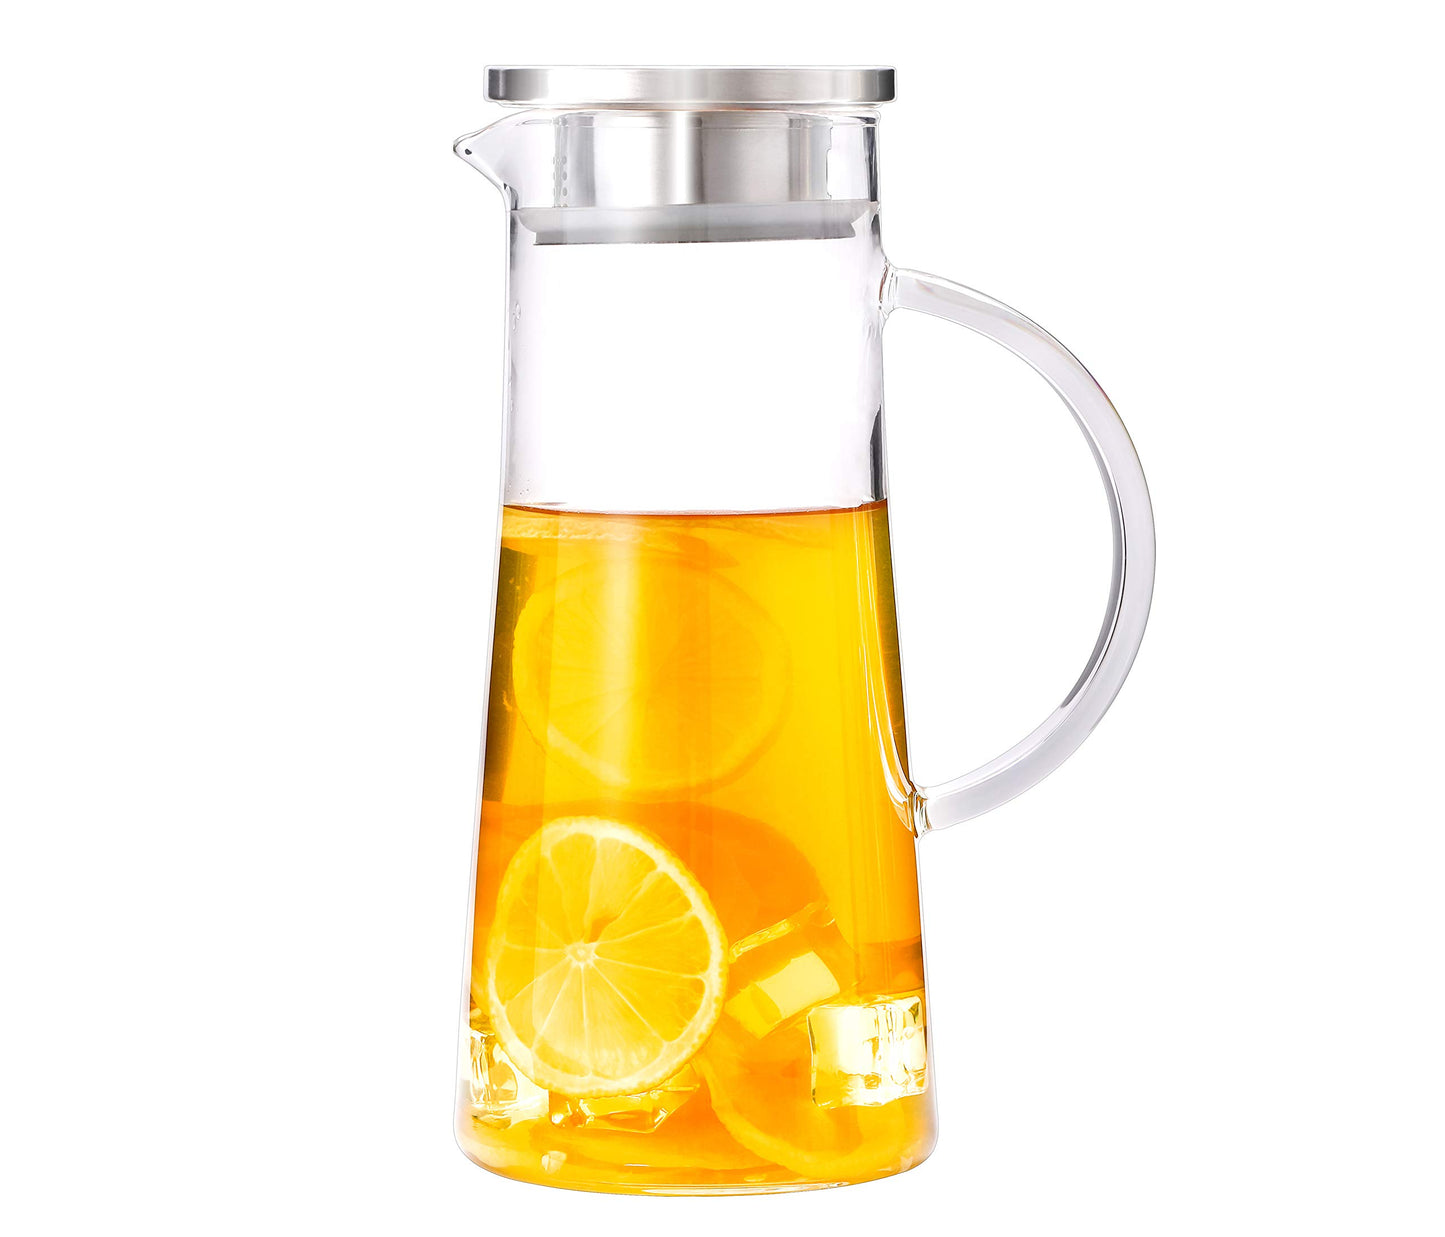 1.5 Liter 50 Ounces Glass Water Pitcher with Lid and Handle,Juice Pitcher,Cold Water Pitcher,Heat Resistant Glass Carafe Pitcher with Lid for Tea,Juice,Milk, Cold or Hot Beverages